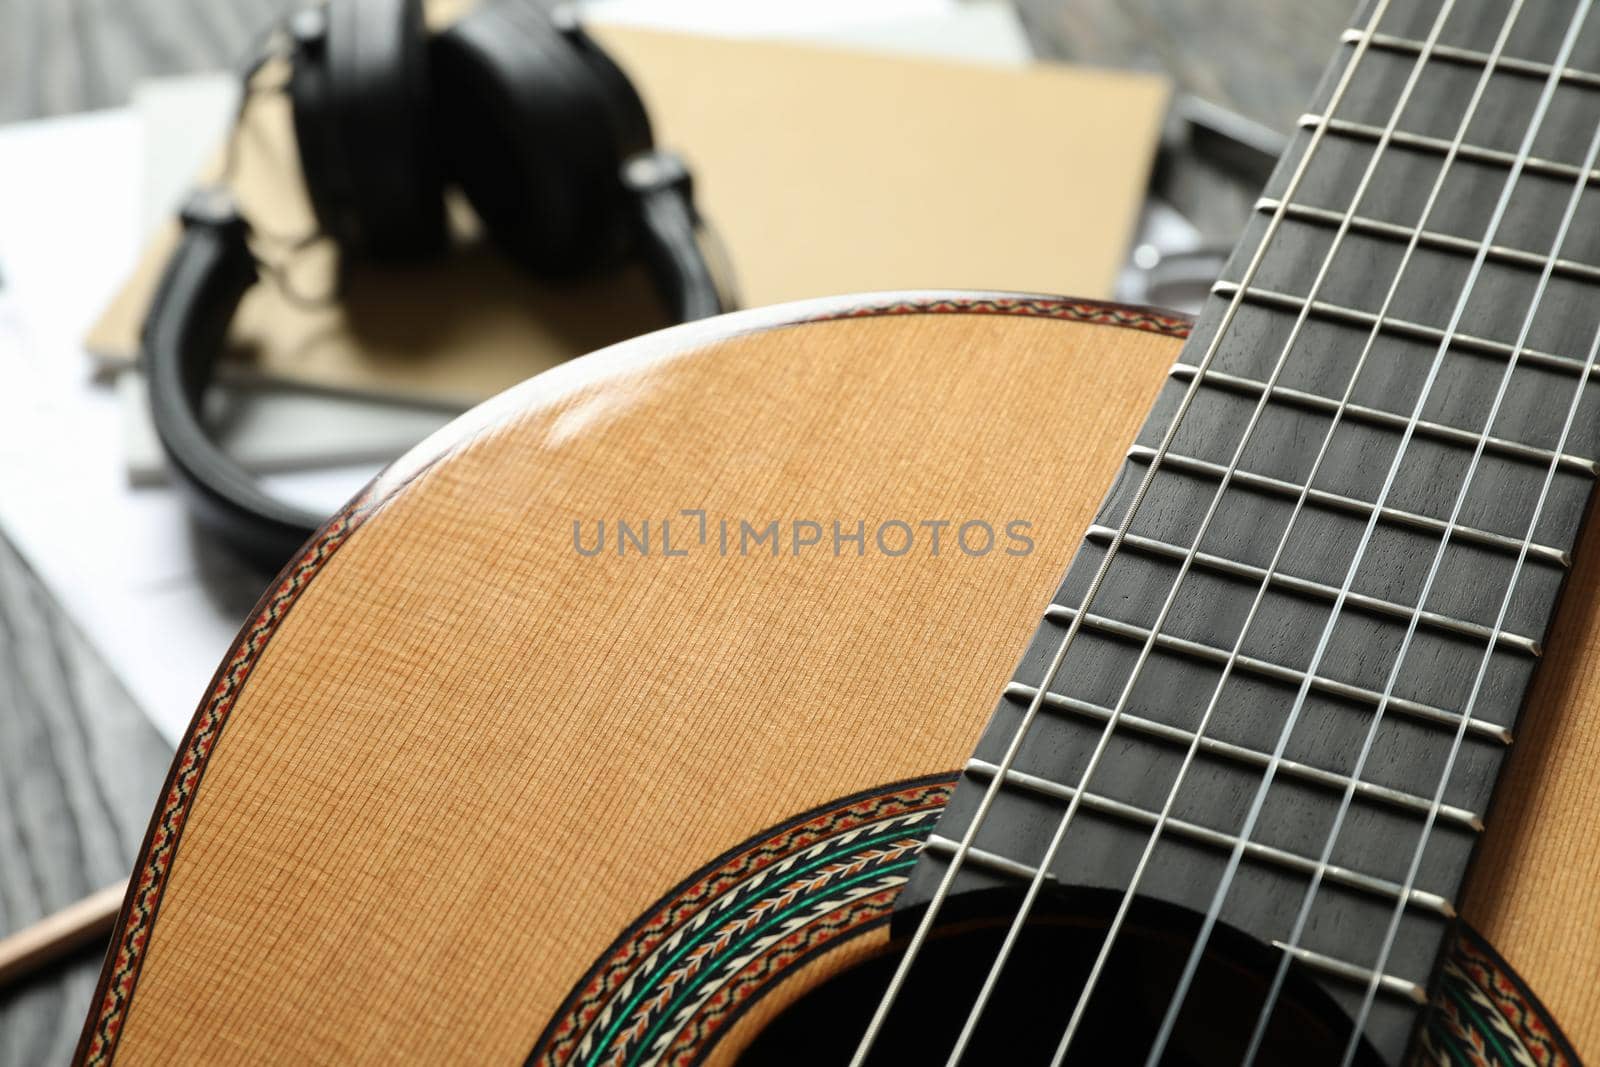 Classic guitar and music maker accessories against wooden background, closeup by AtlasCompany